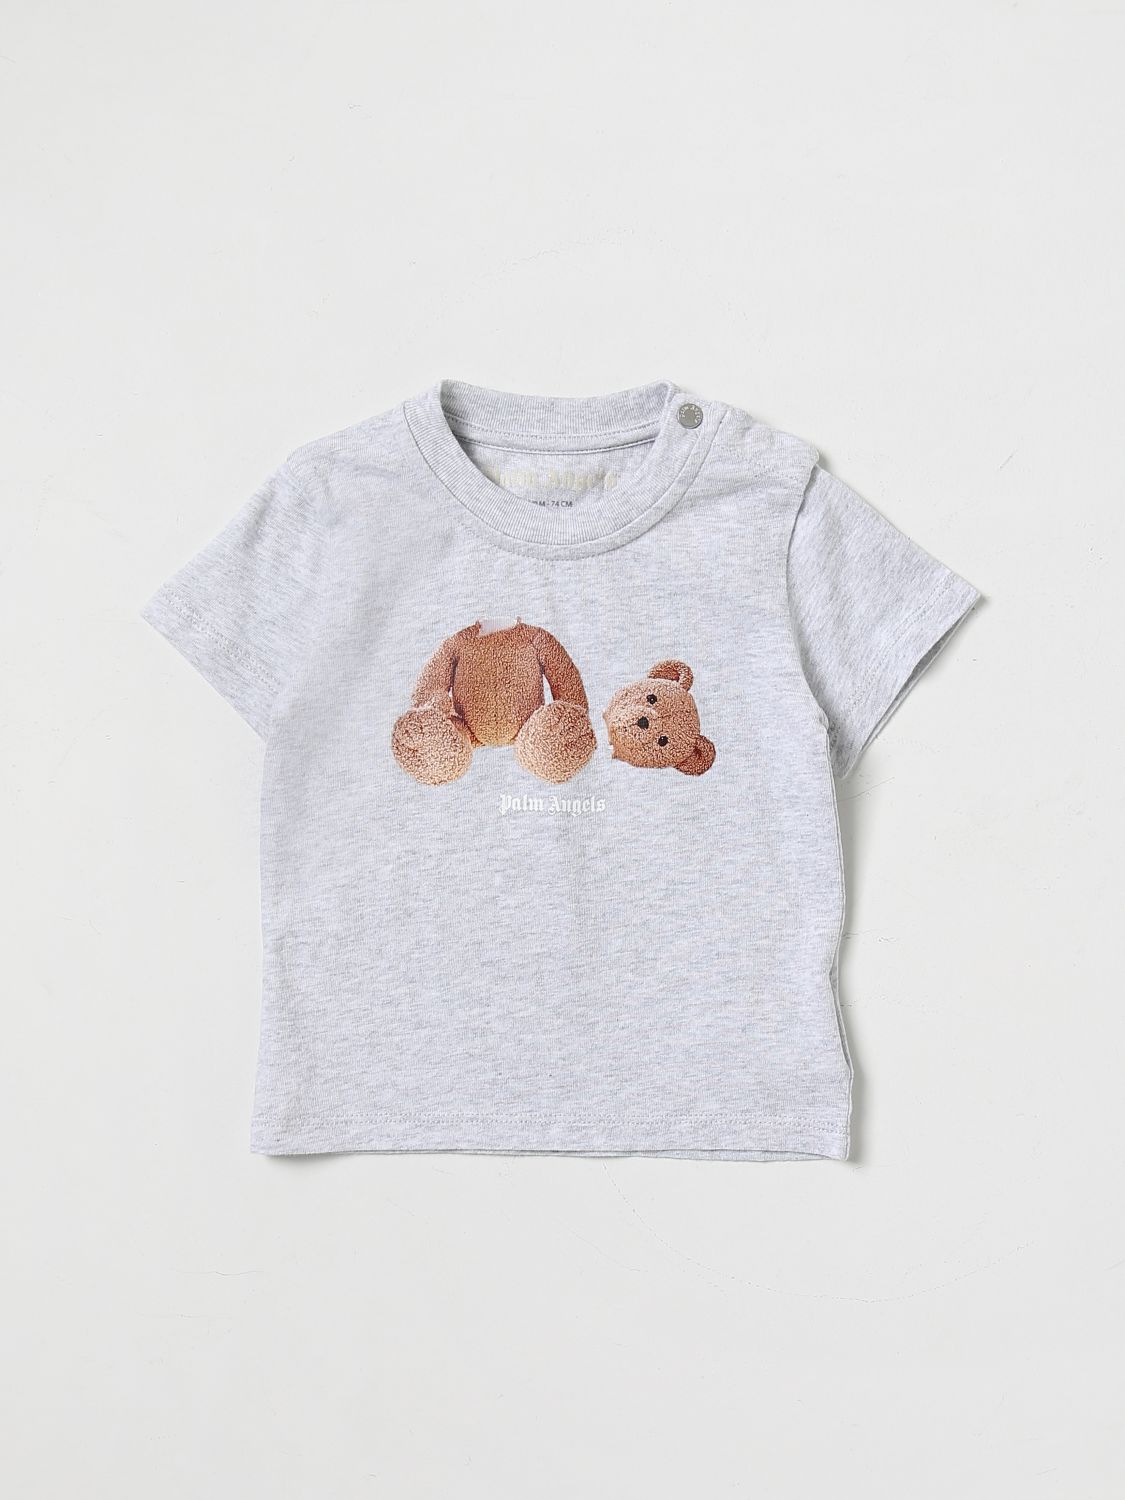 PALM ANGELS T-SHIRT WITH BEAR PRINT,393595020